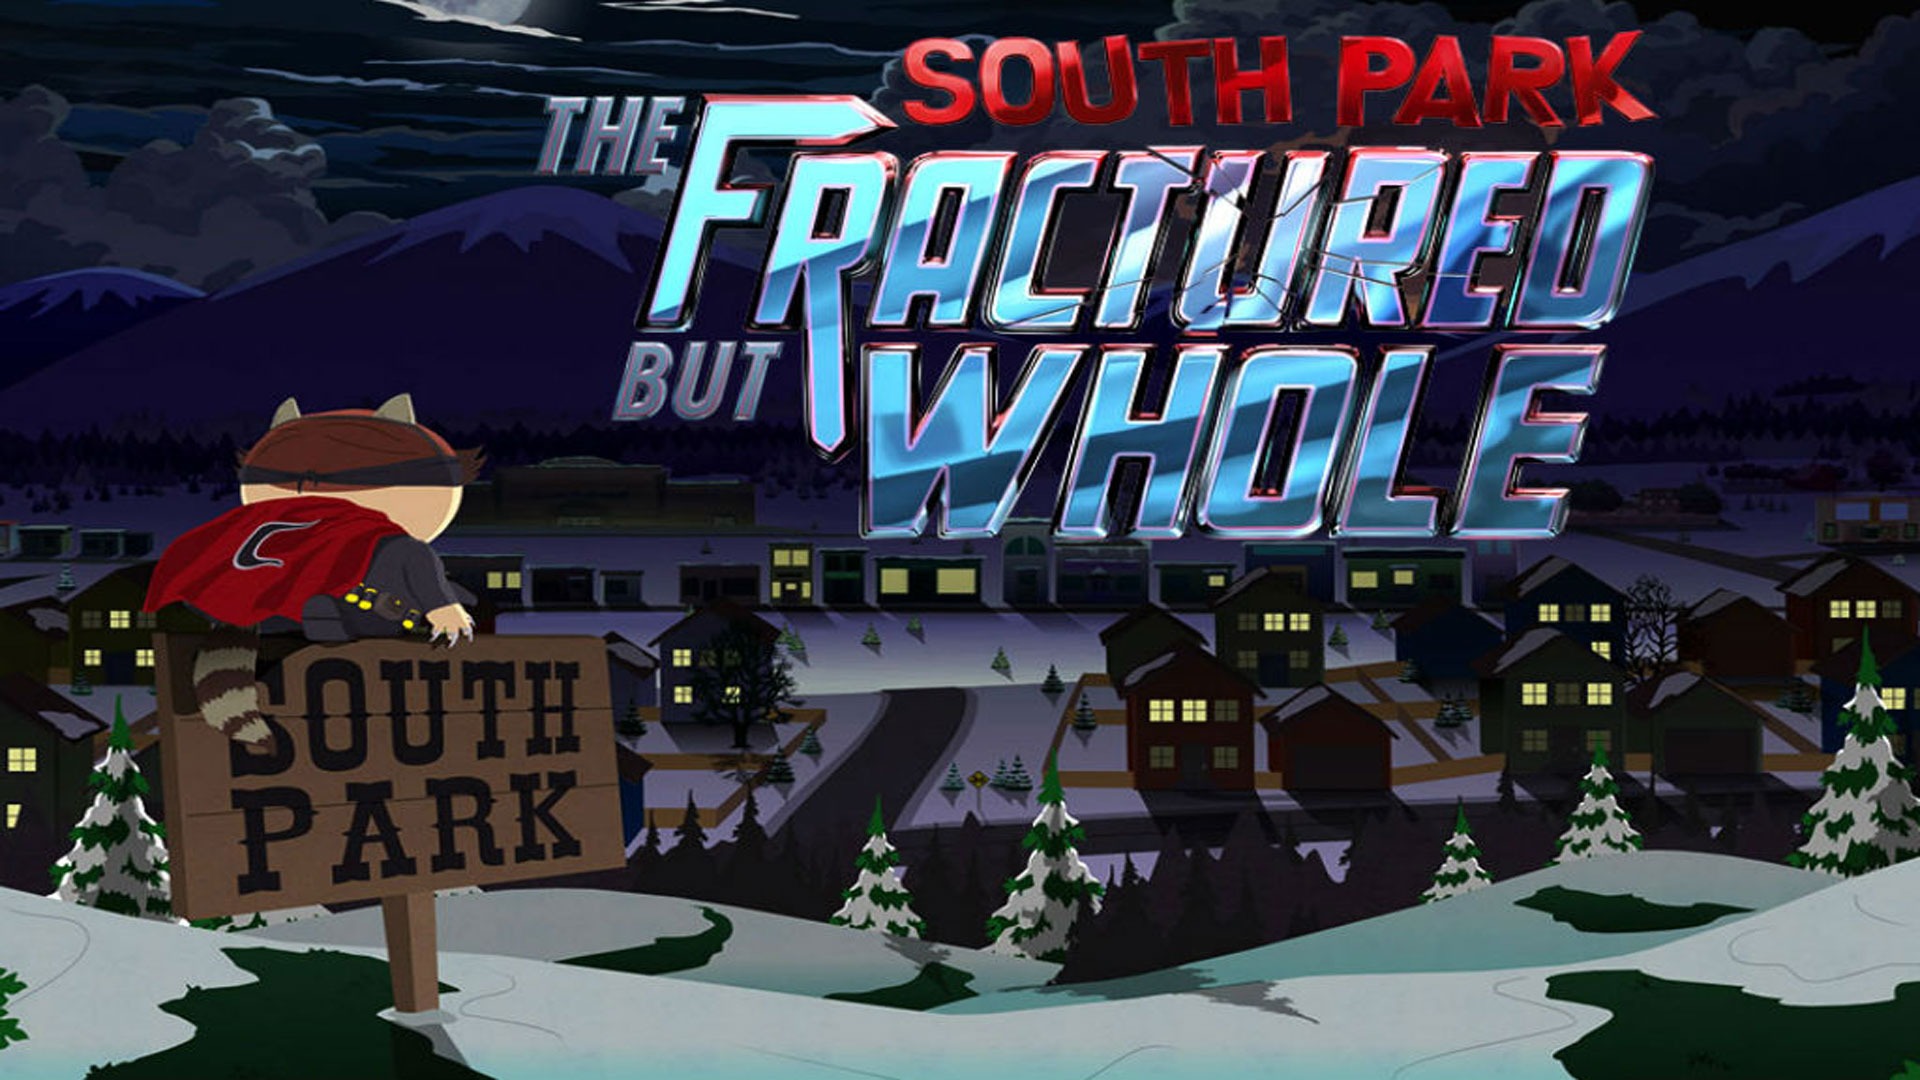 South Park: The Fractured but Whole / 3 / Что тут происходит?